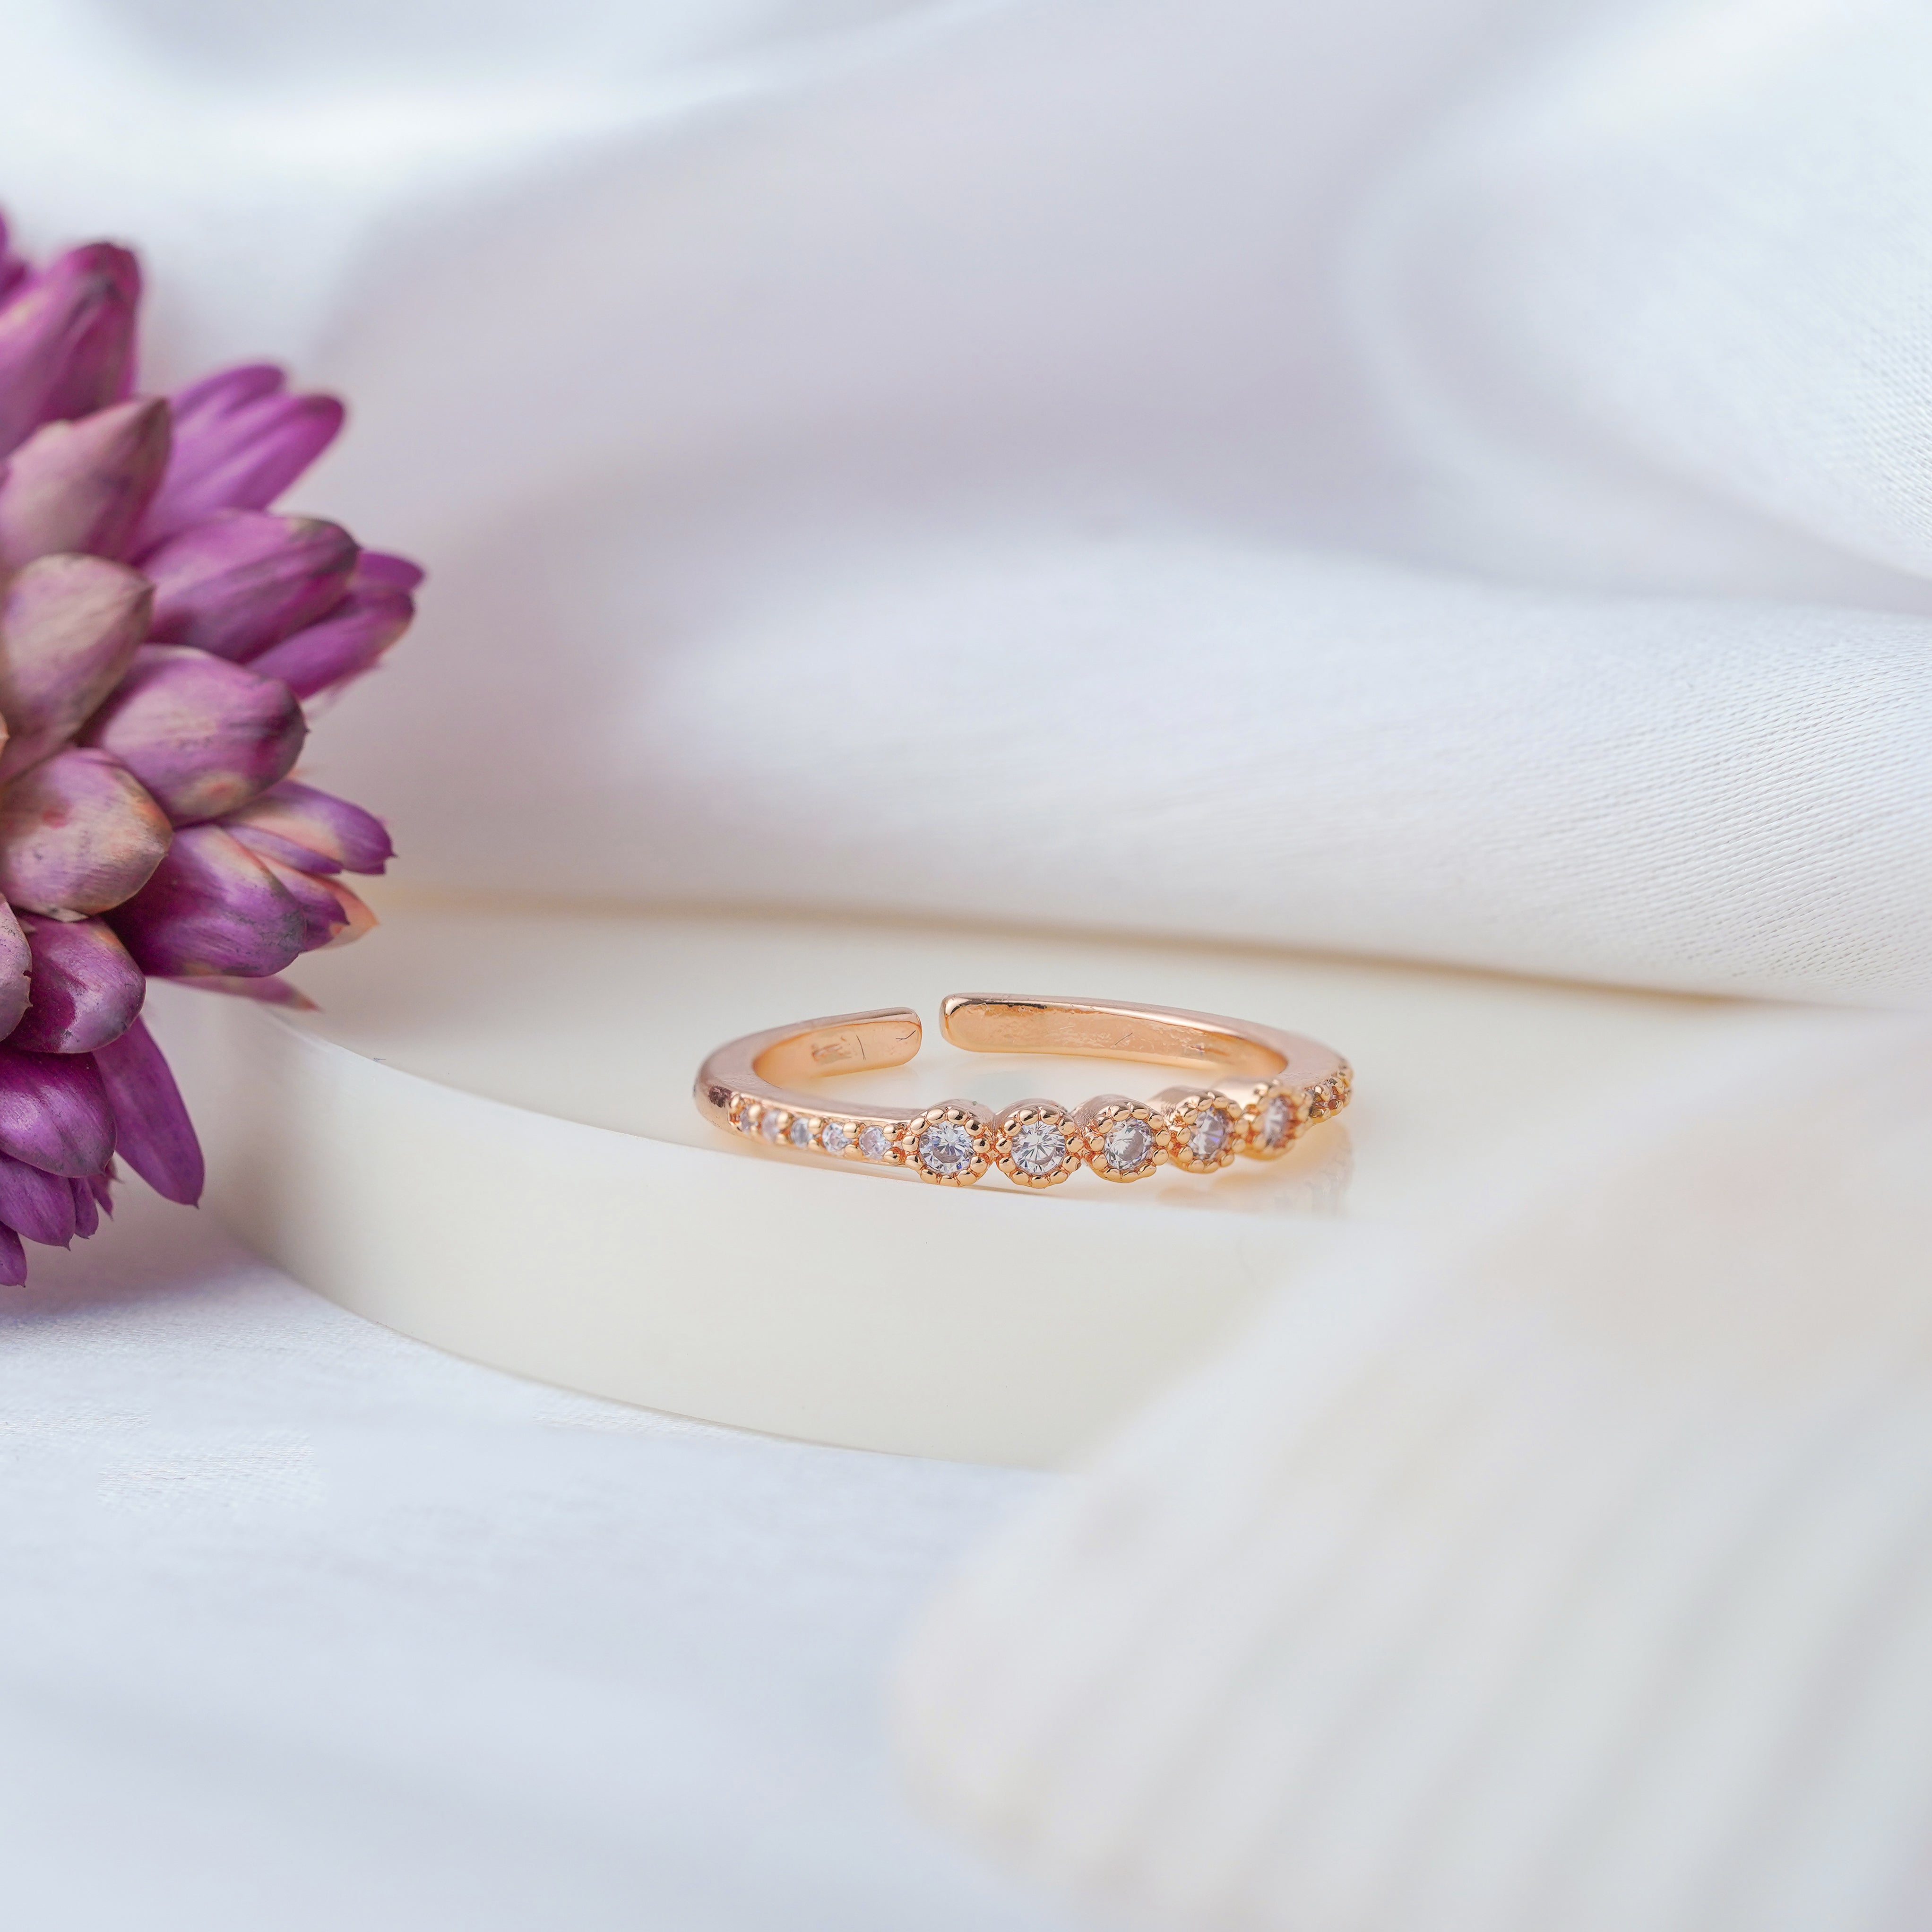 Jewelsium Rose Gold Designer Ring: Redefining Luxury with Every Sparkle